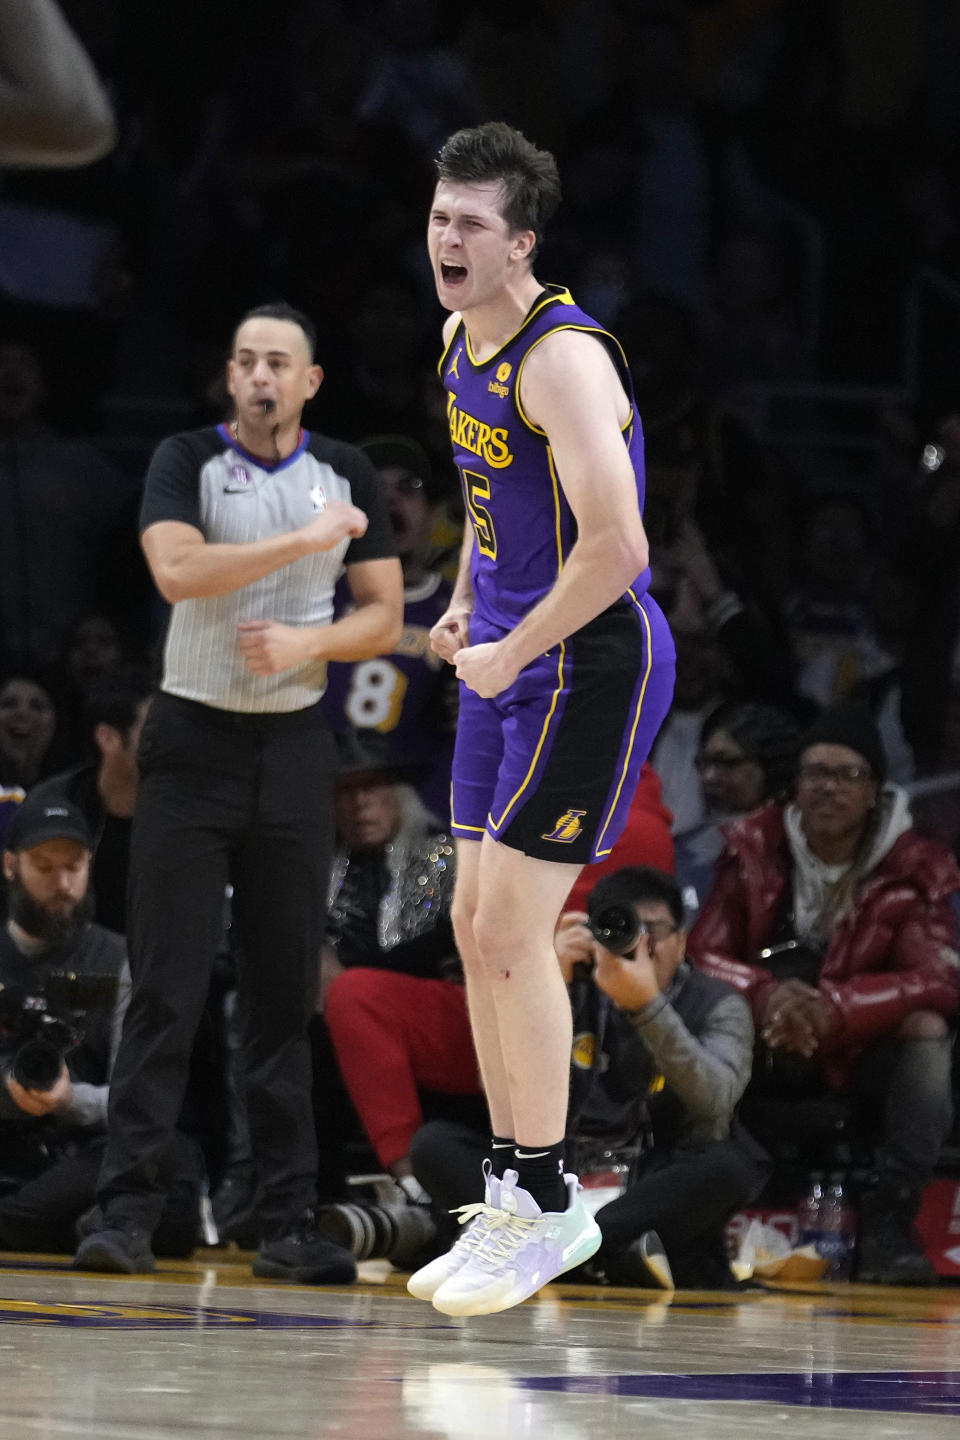 Los Angeles Lakers guard Austin Reaves celebrates after scoring against the Toronto Raptors during the second half of an NBA basketball game Friday, March 10, 2023, in Los Angeles. (AP Photo/Marcio Jose Sanchez)